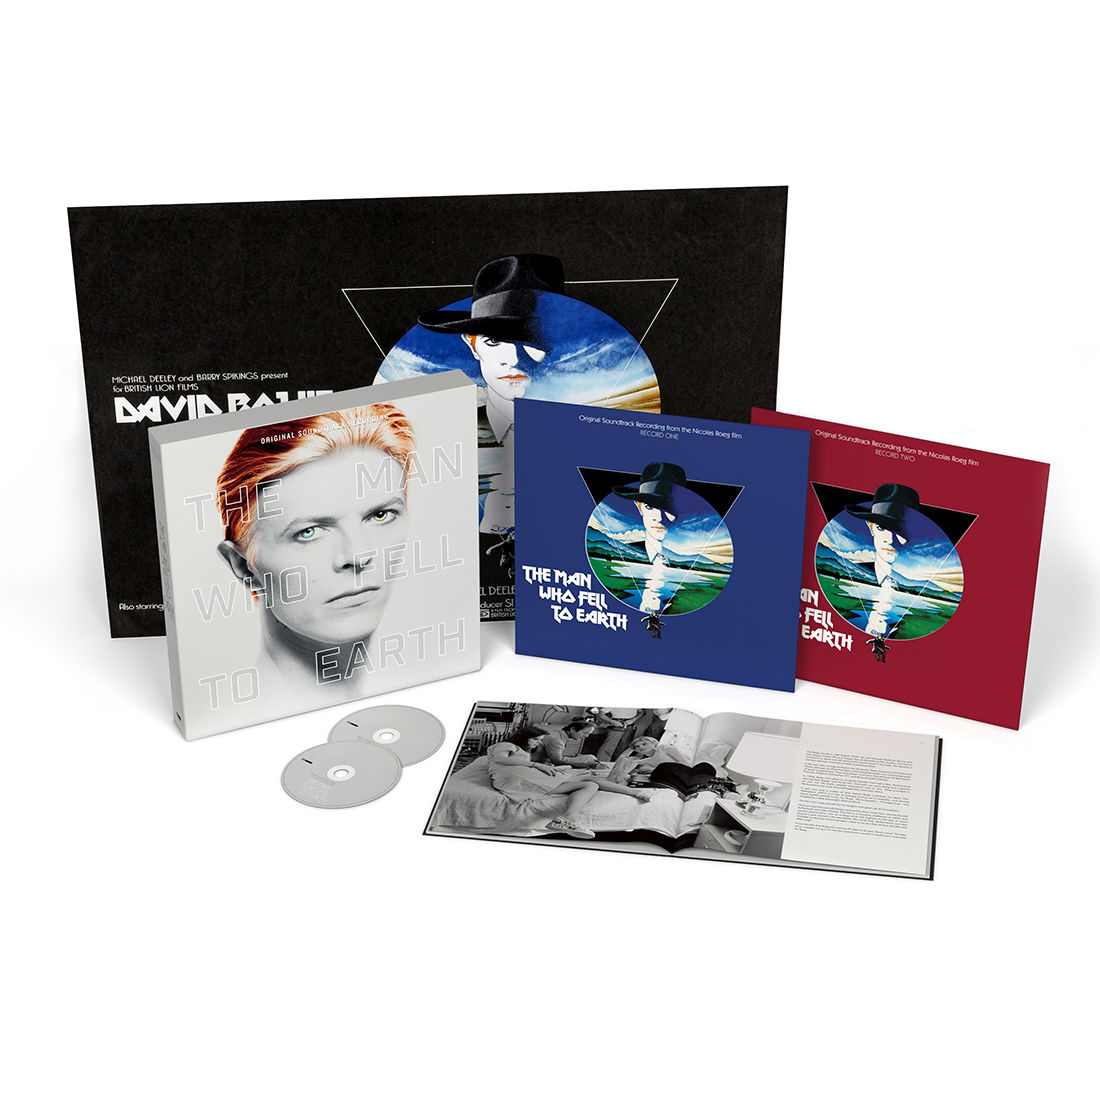 David Bowie, Various Artists - The Man Who Fell To Earth (Original Soundtrack): Deluxe Vinyl + CD Box Set